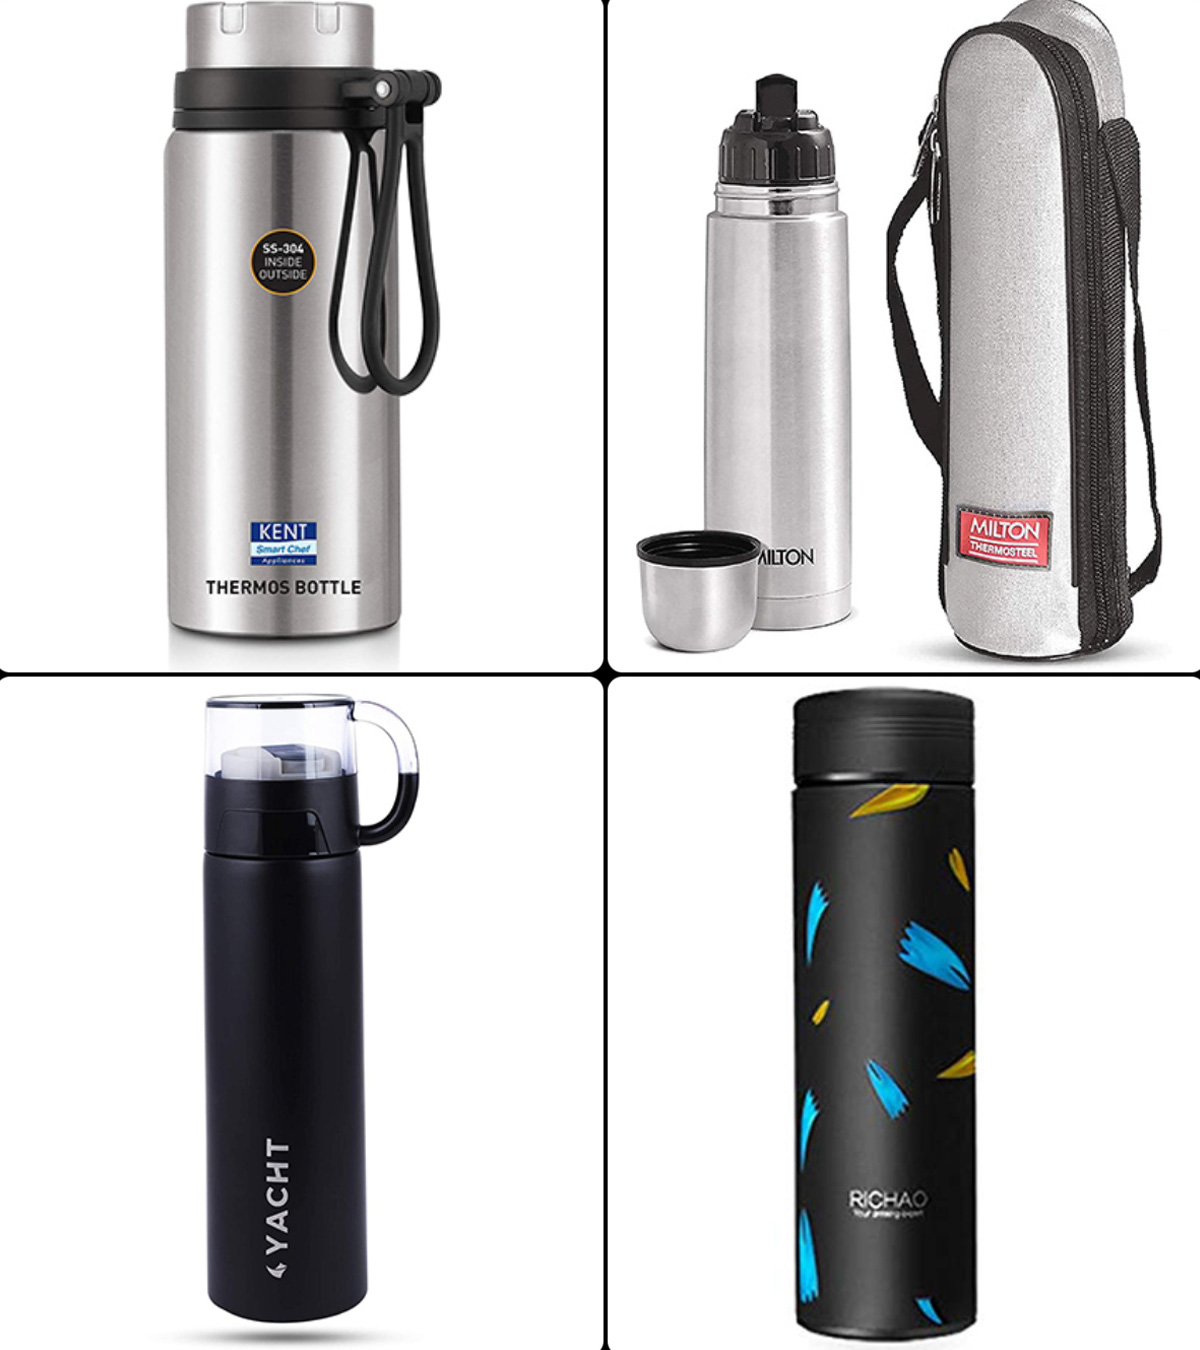 How do vacuum flasks work? Different uses of a vacuum flask